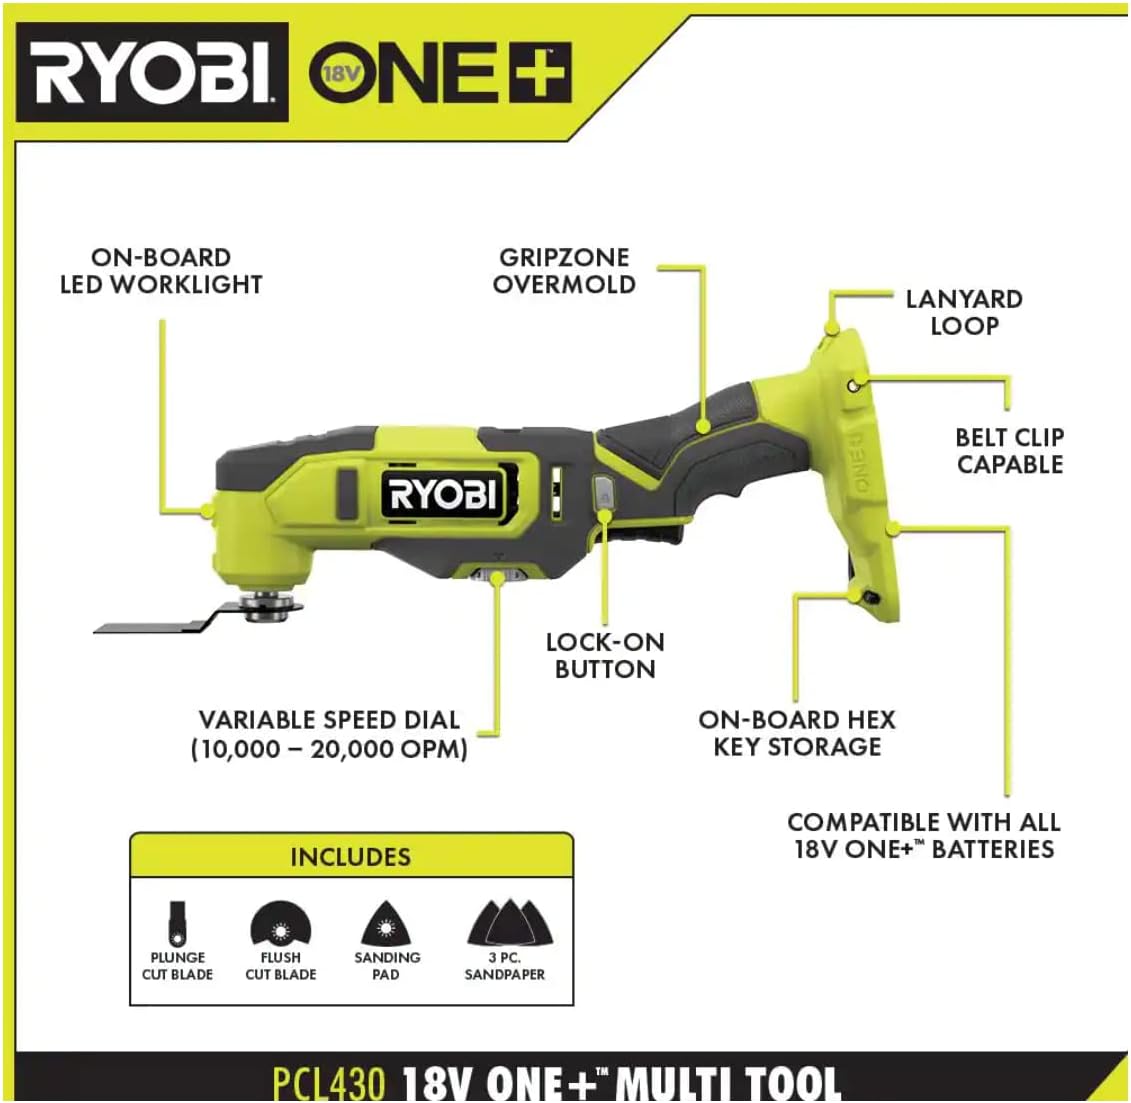 Ryobi One+ Pcl1600K2 18V Cordless 6-Tool Combo Kit With 1.5 Ah Battery, 4.0 Ah Battery, And Charger